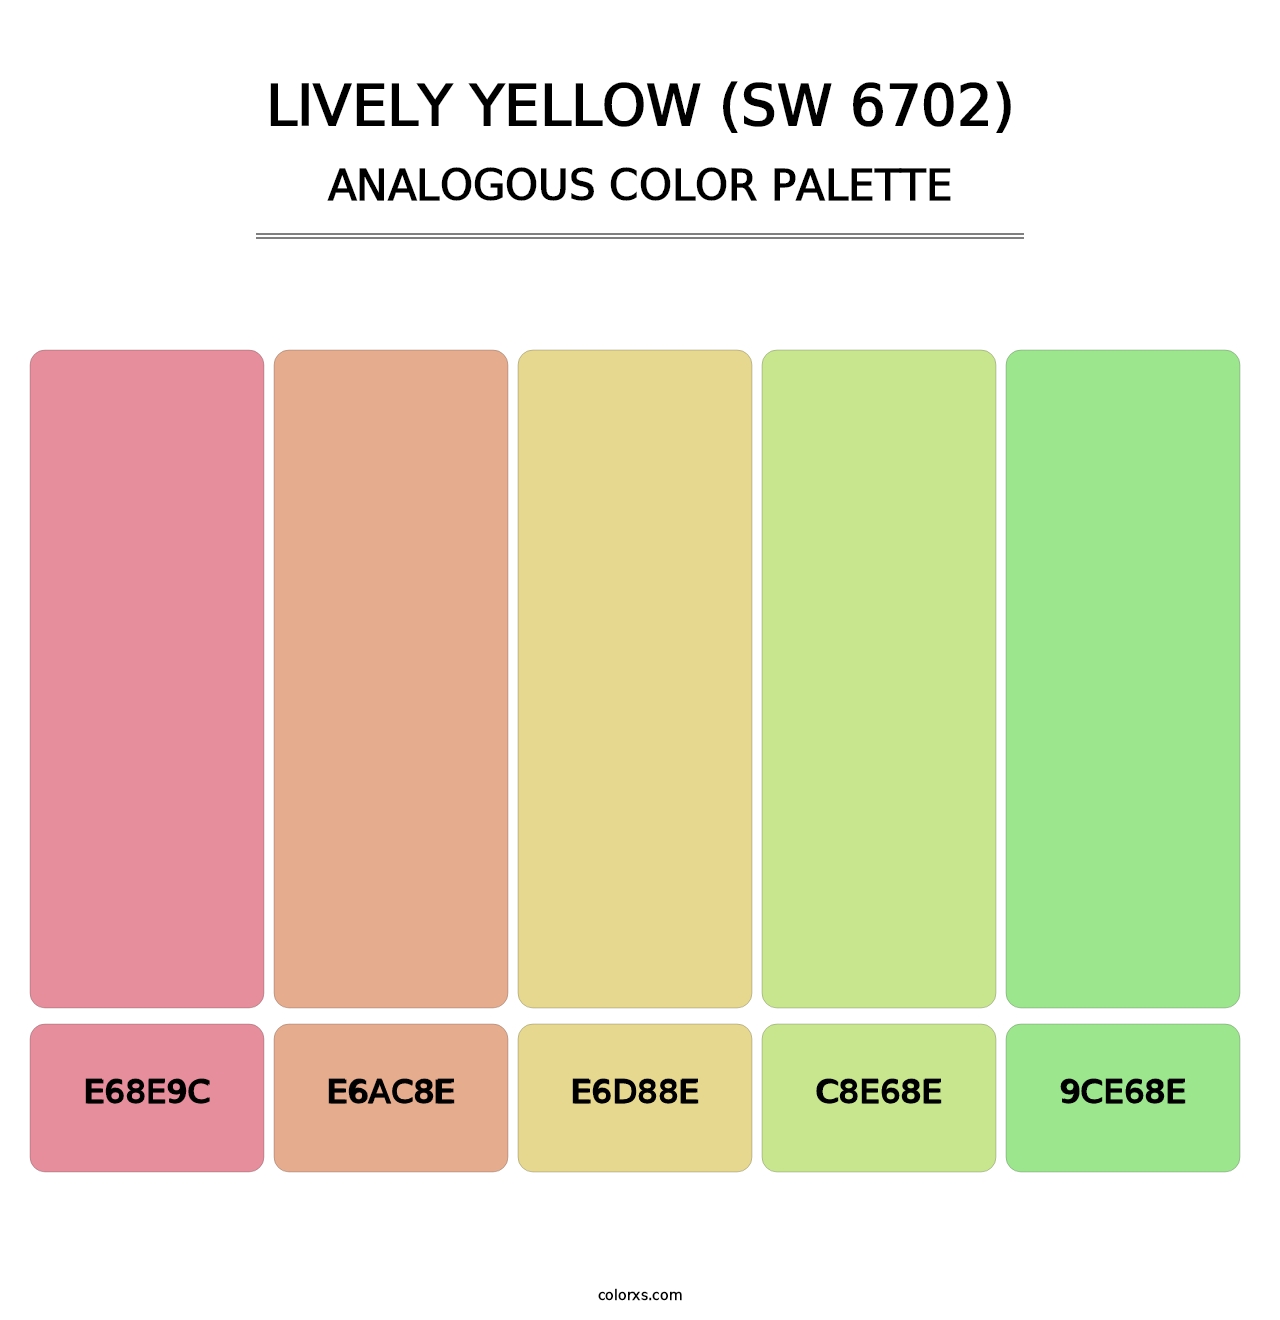 Lively Yellow (SW 6702) - Analogous Color Palette